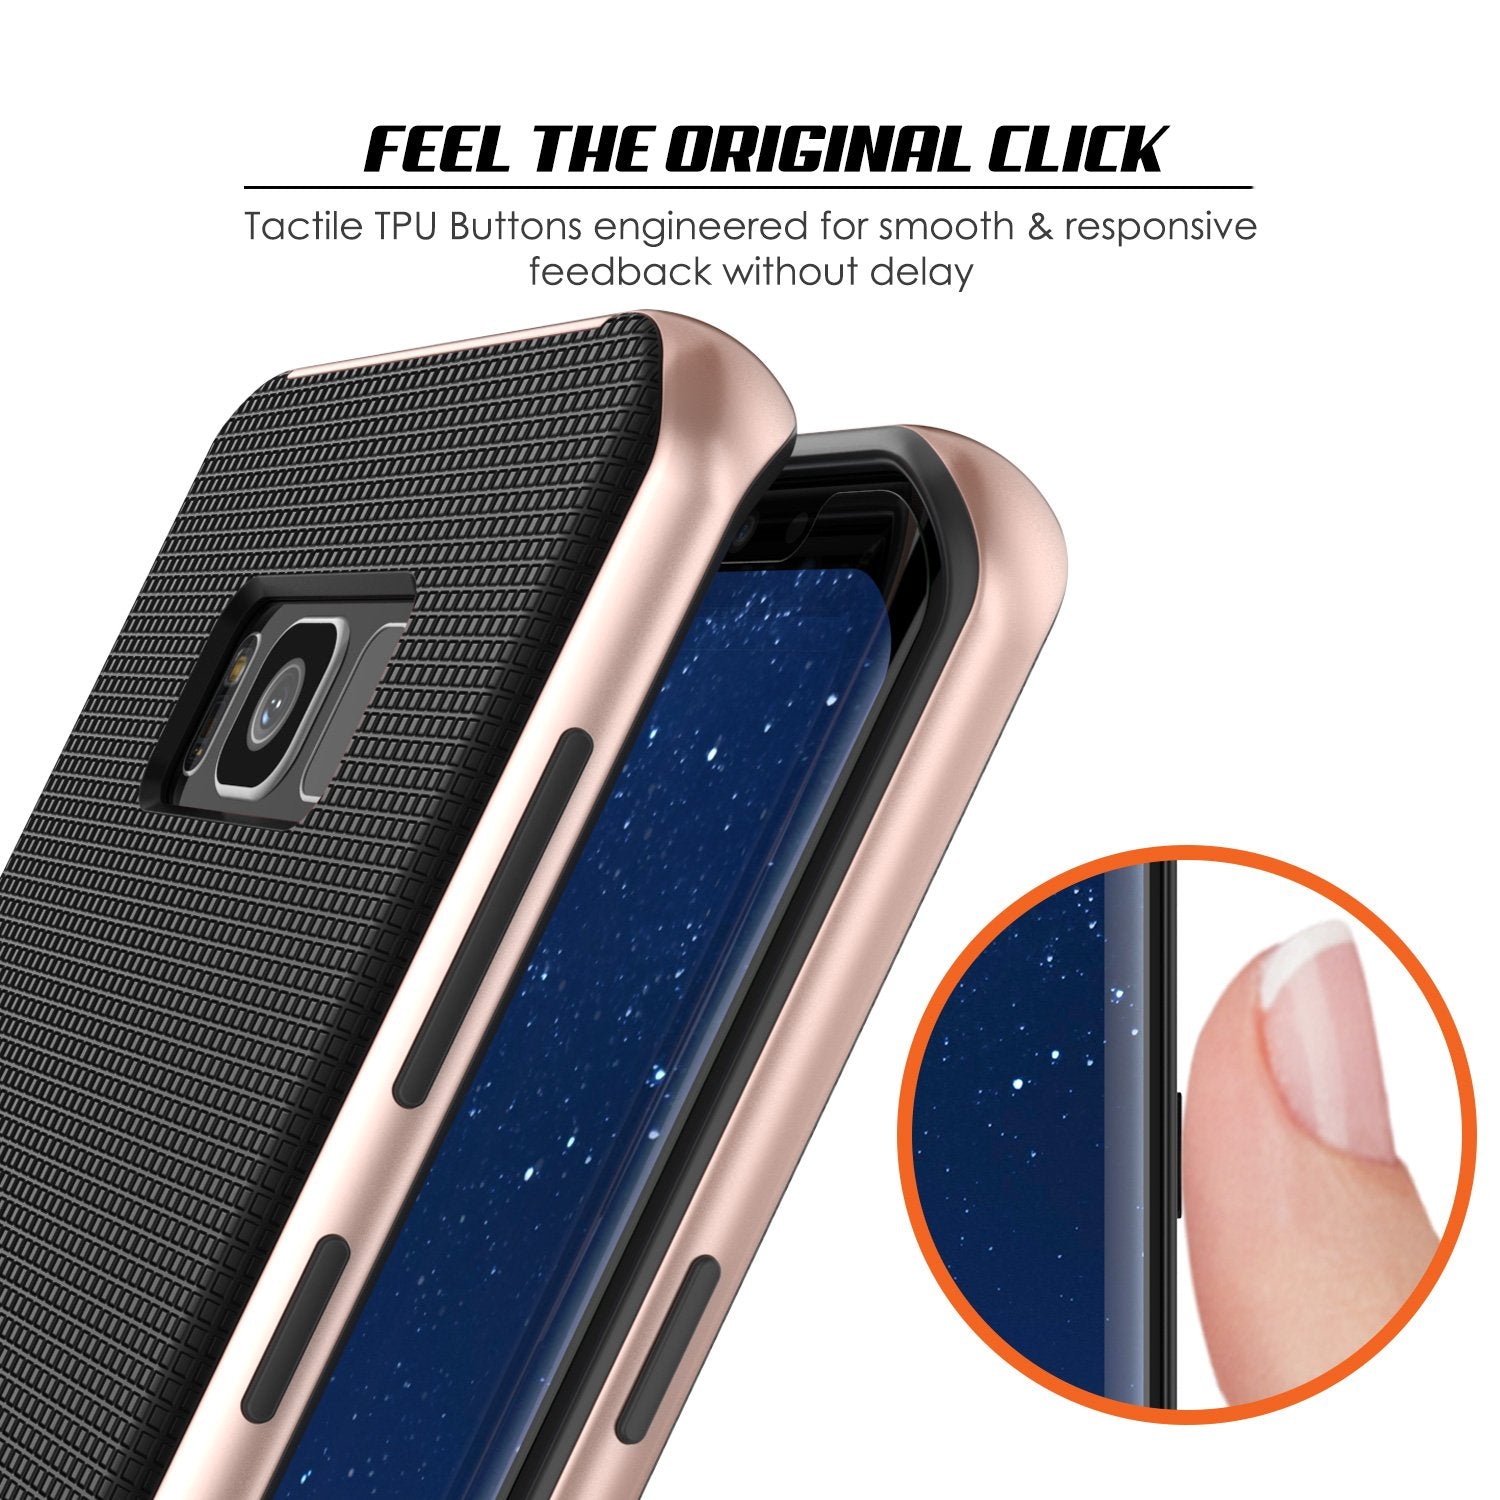 Galaxy S8 Case, PunkCase Stealth Series Hybrid Shockproof Rose Gold Cover